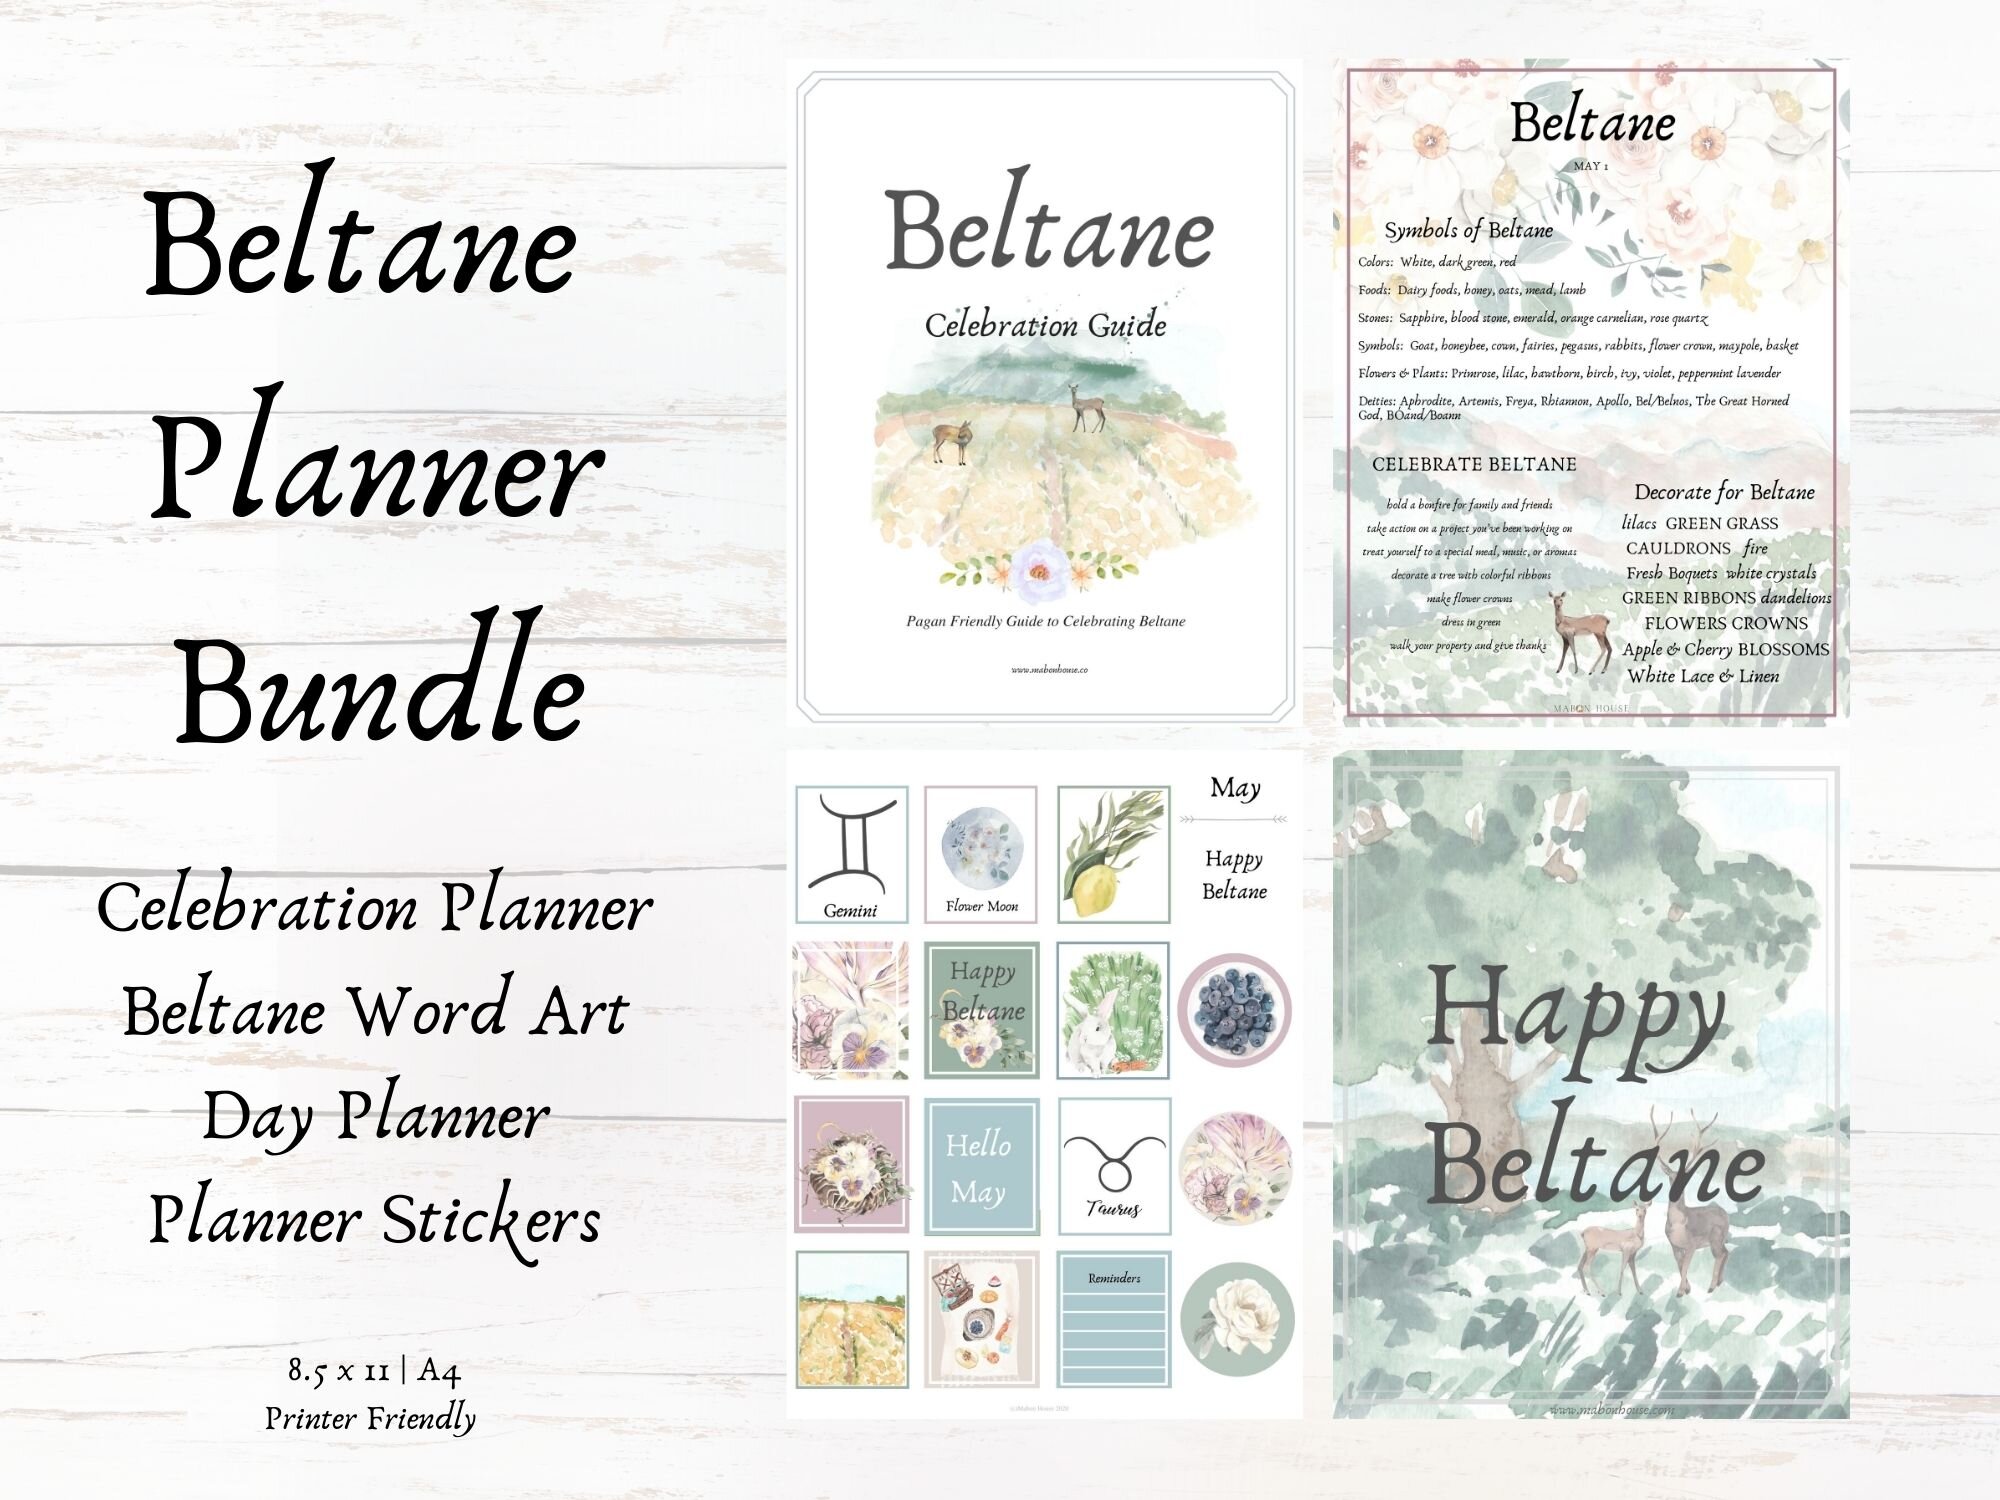 How to Celebrate Beltane